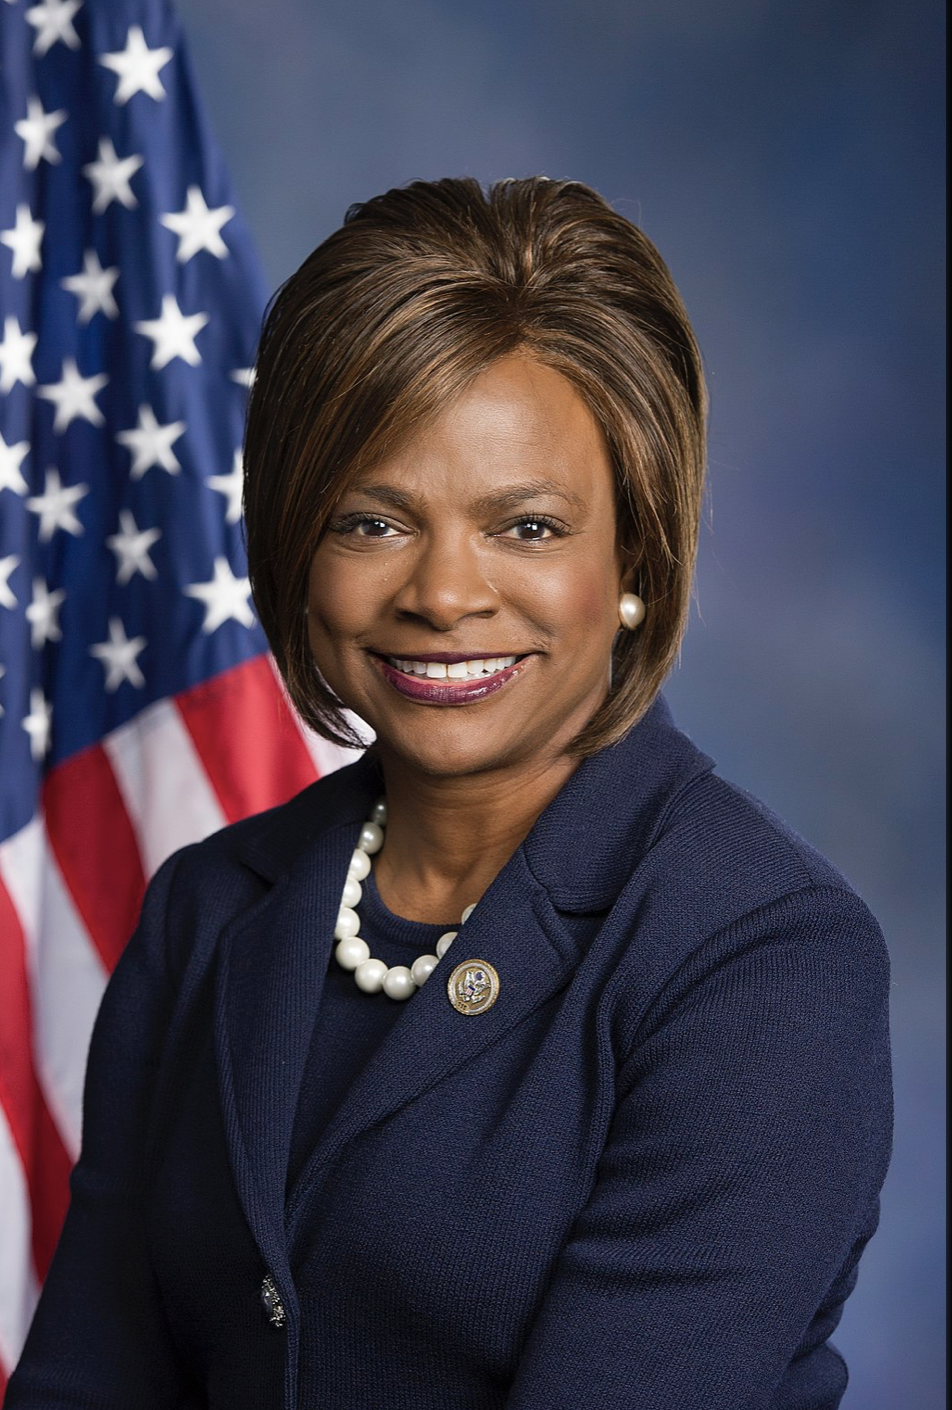 Some 40 years ago, 1 female from FL was elected to the U.S. Senate. Will Val Demings be #2?